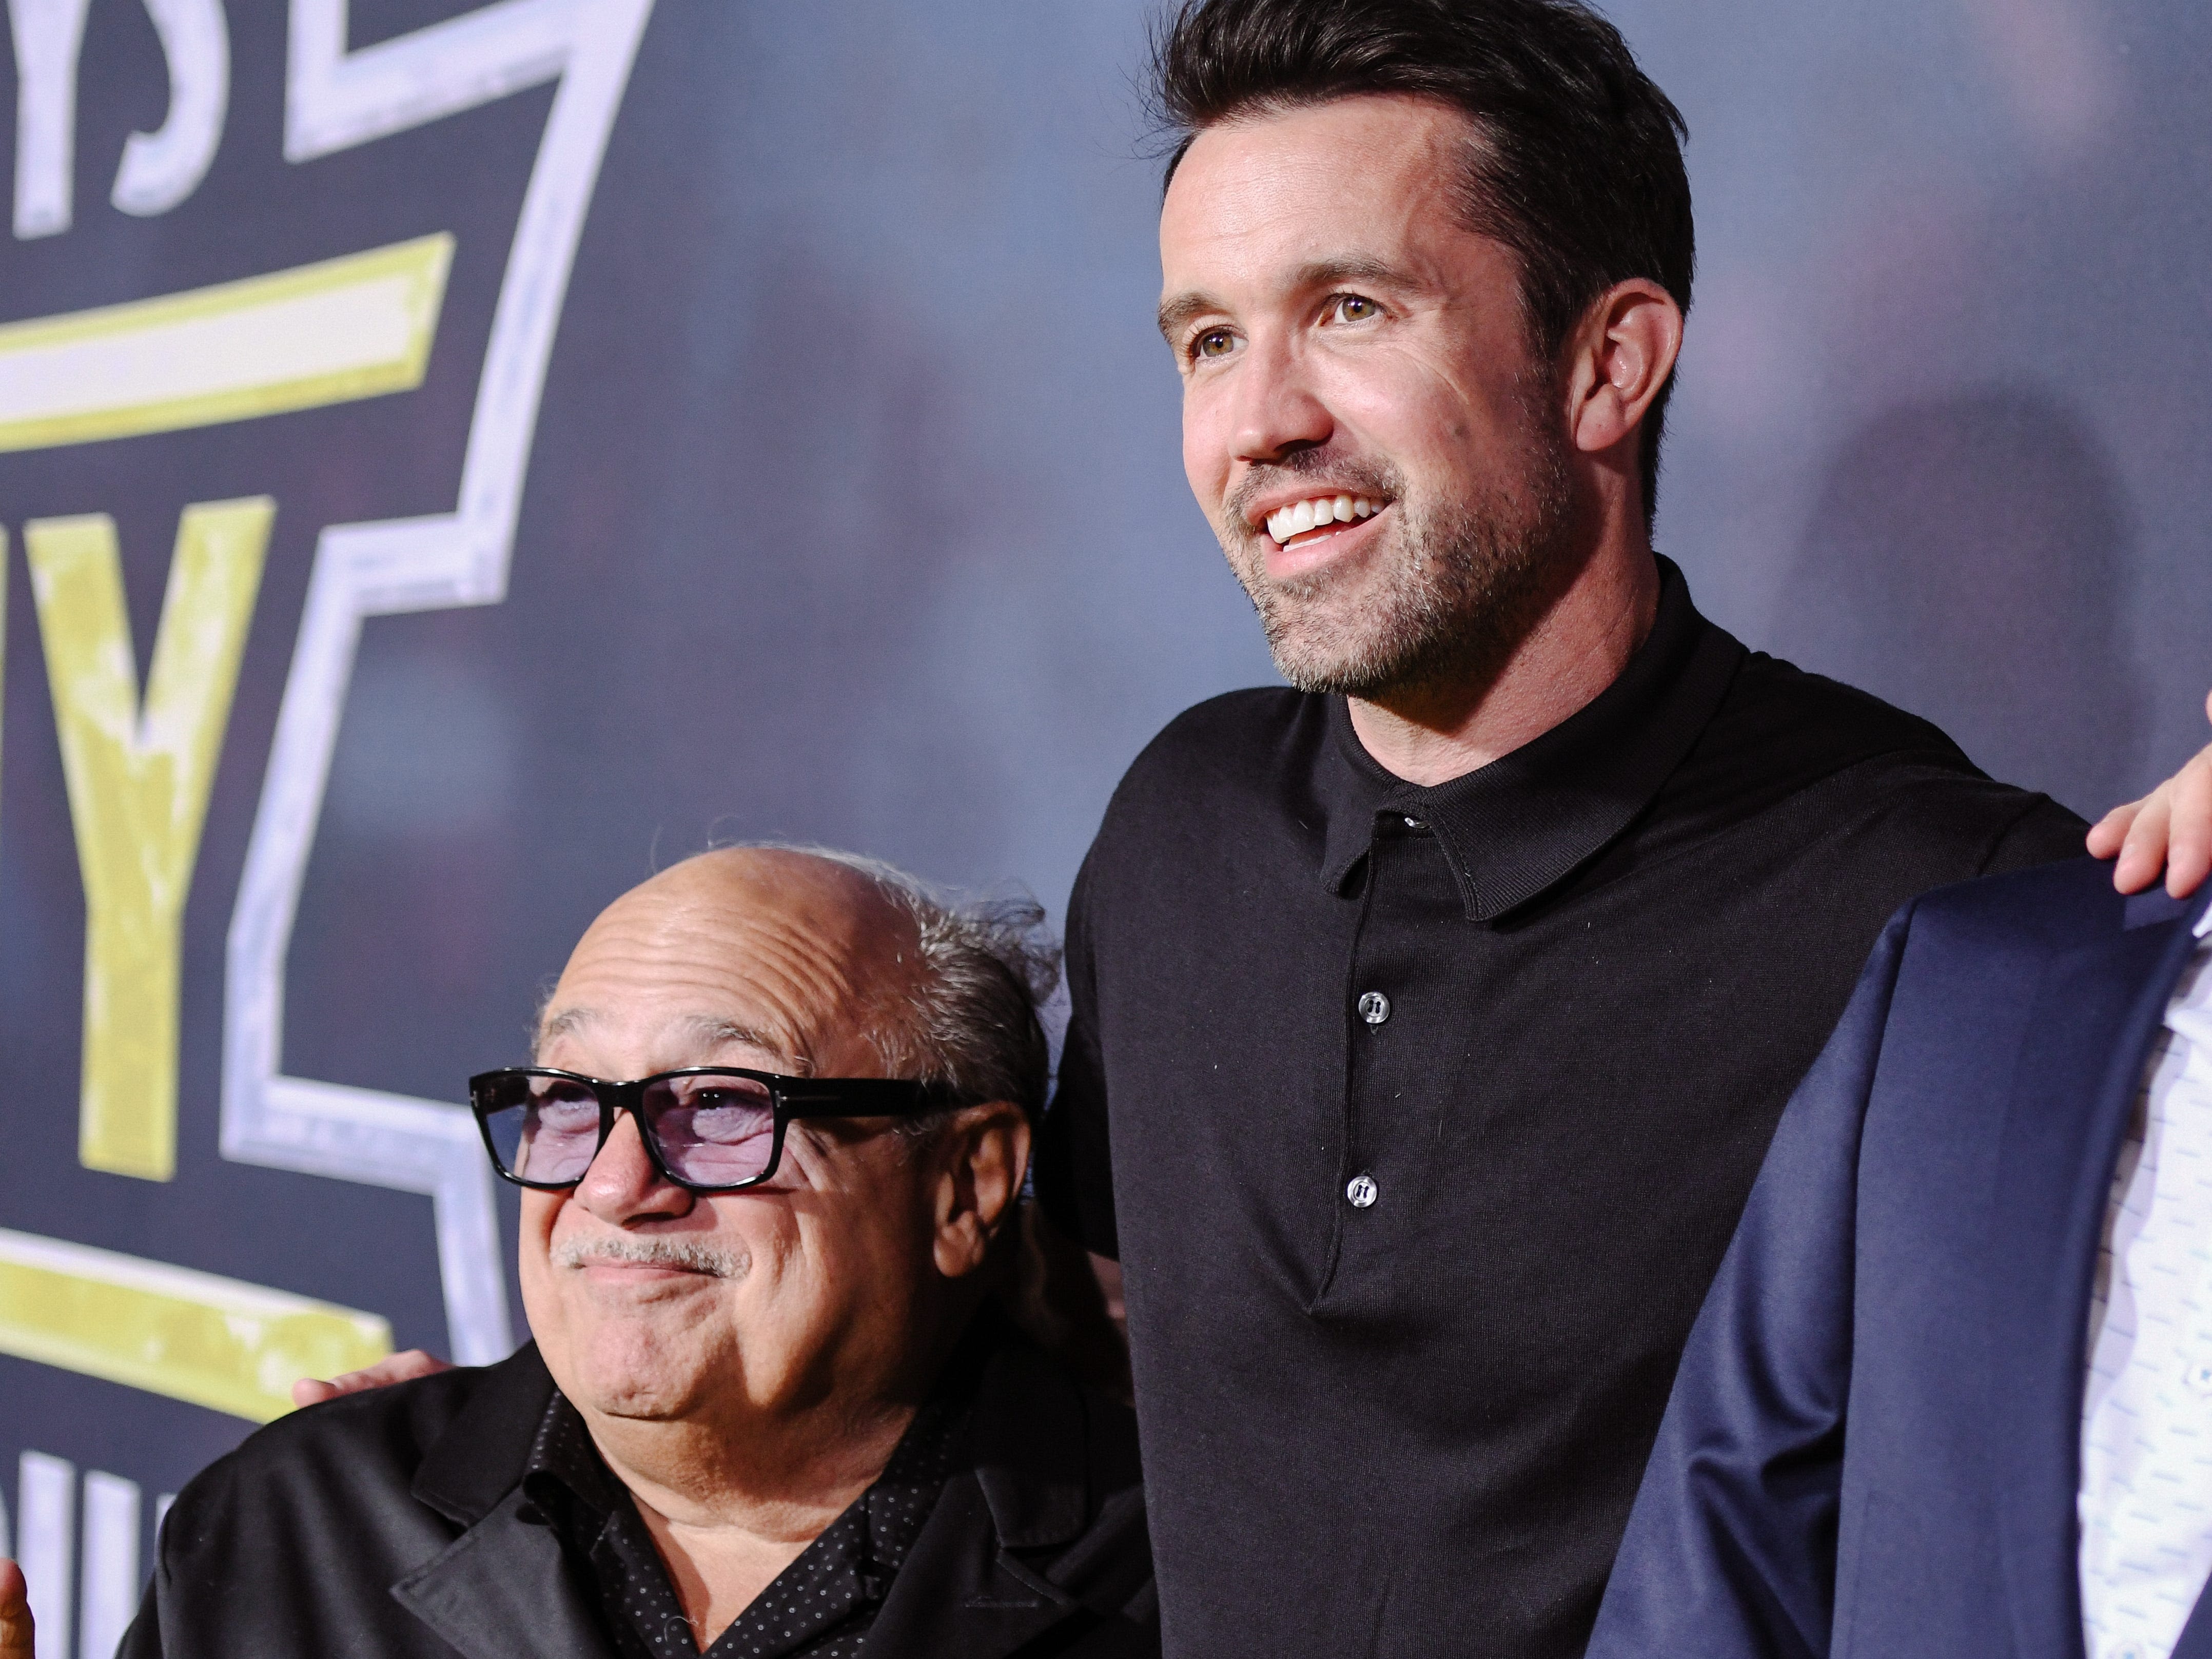 Danny DeVito gave Rob McElhenney simple advice on how to raise well-adjusted kids in Hollywood: 'The trick is not much of a trick at all'